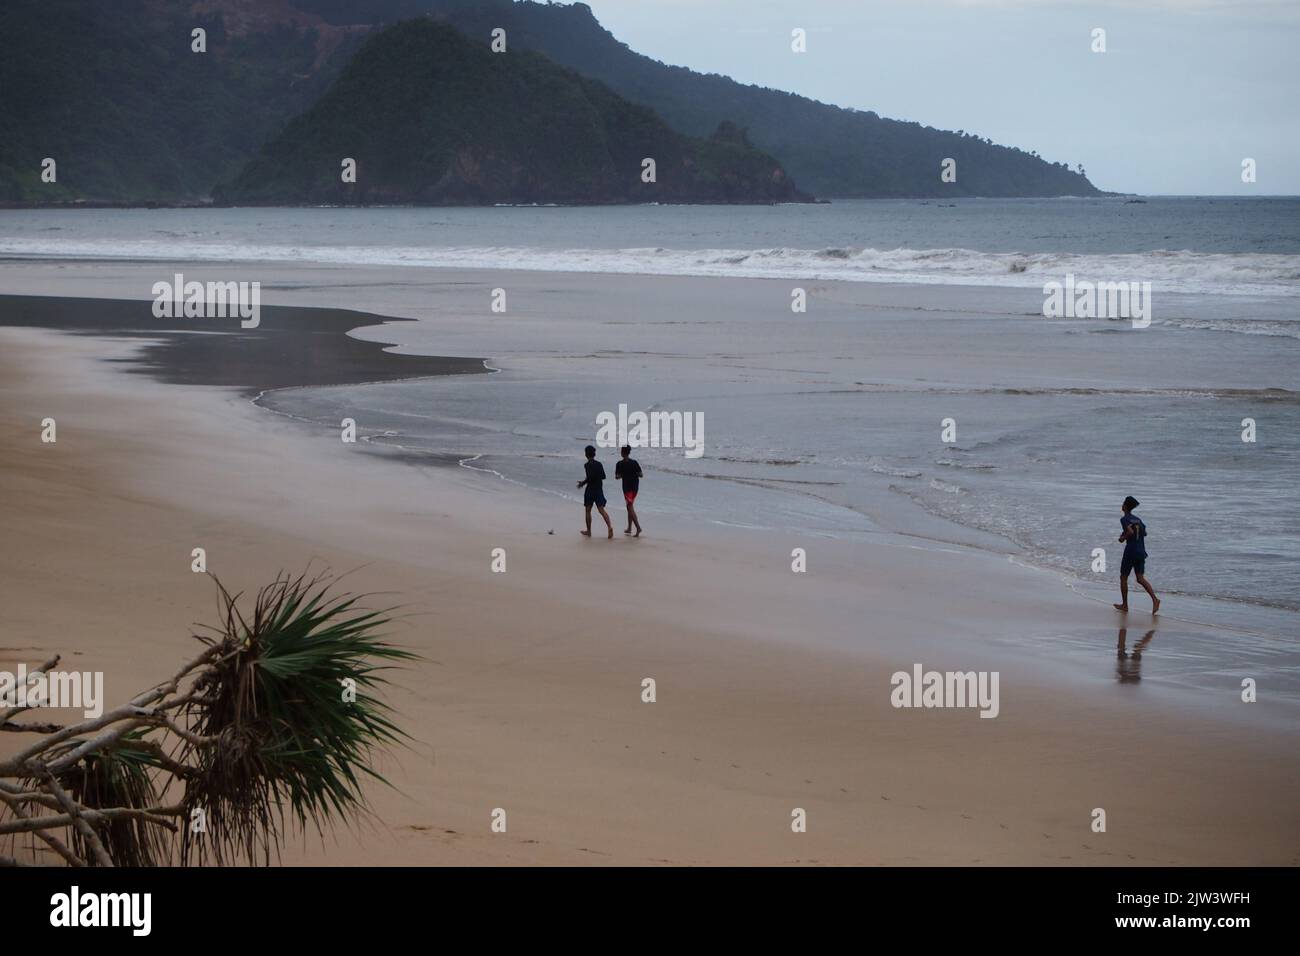 Beach atmosphere of a tourist destination in Banyuwangi, East Java, Indonesia Stock Photo